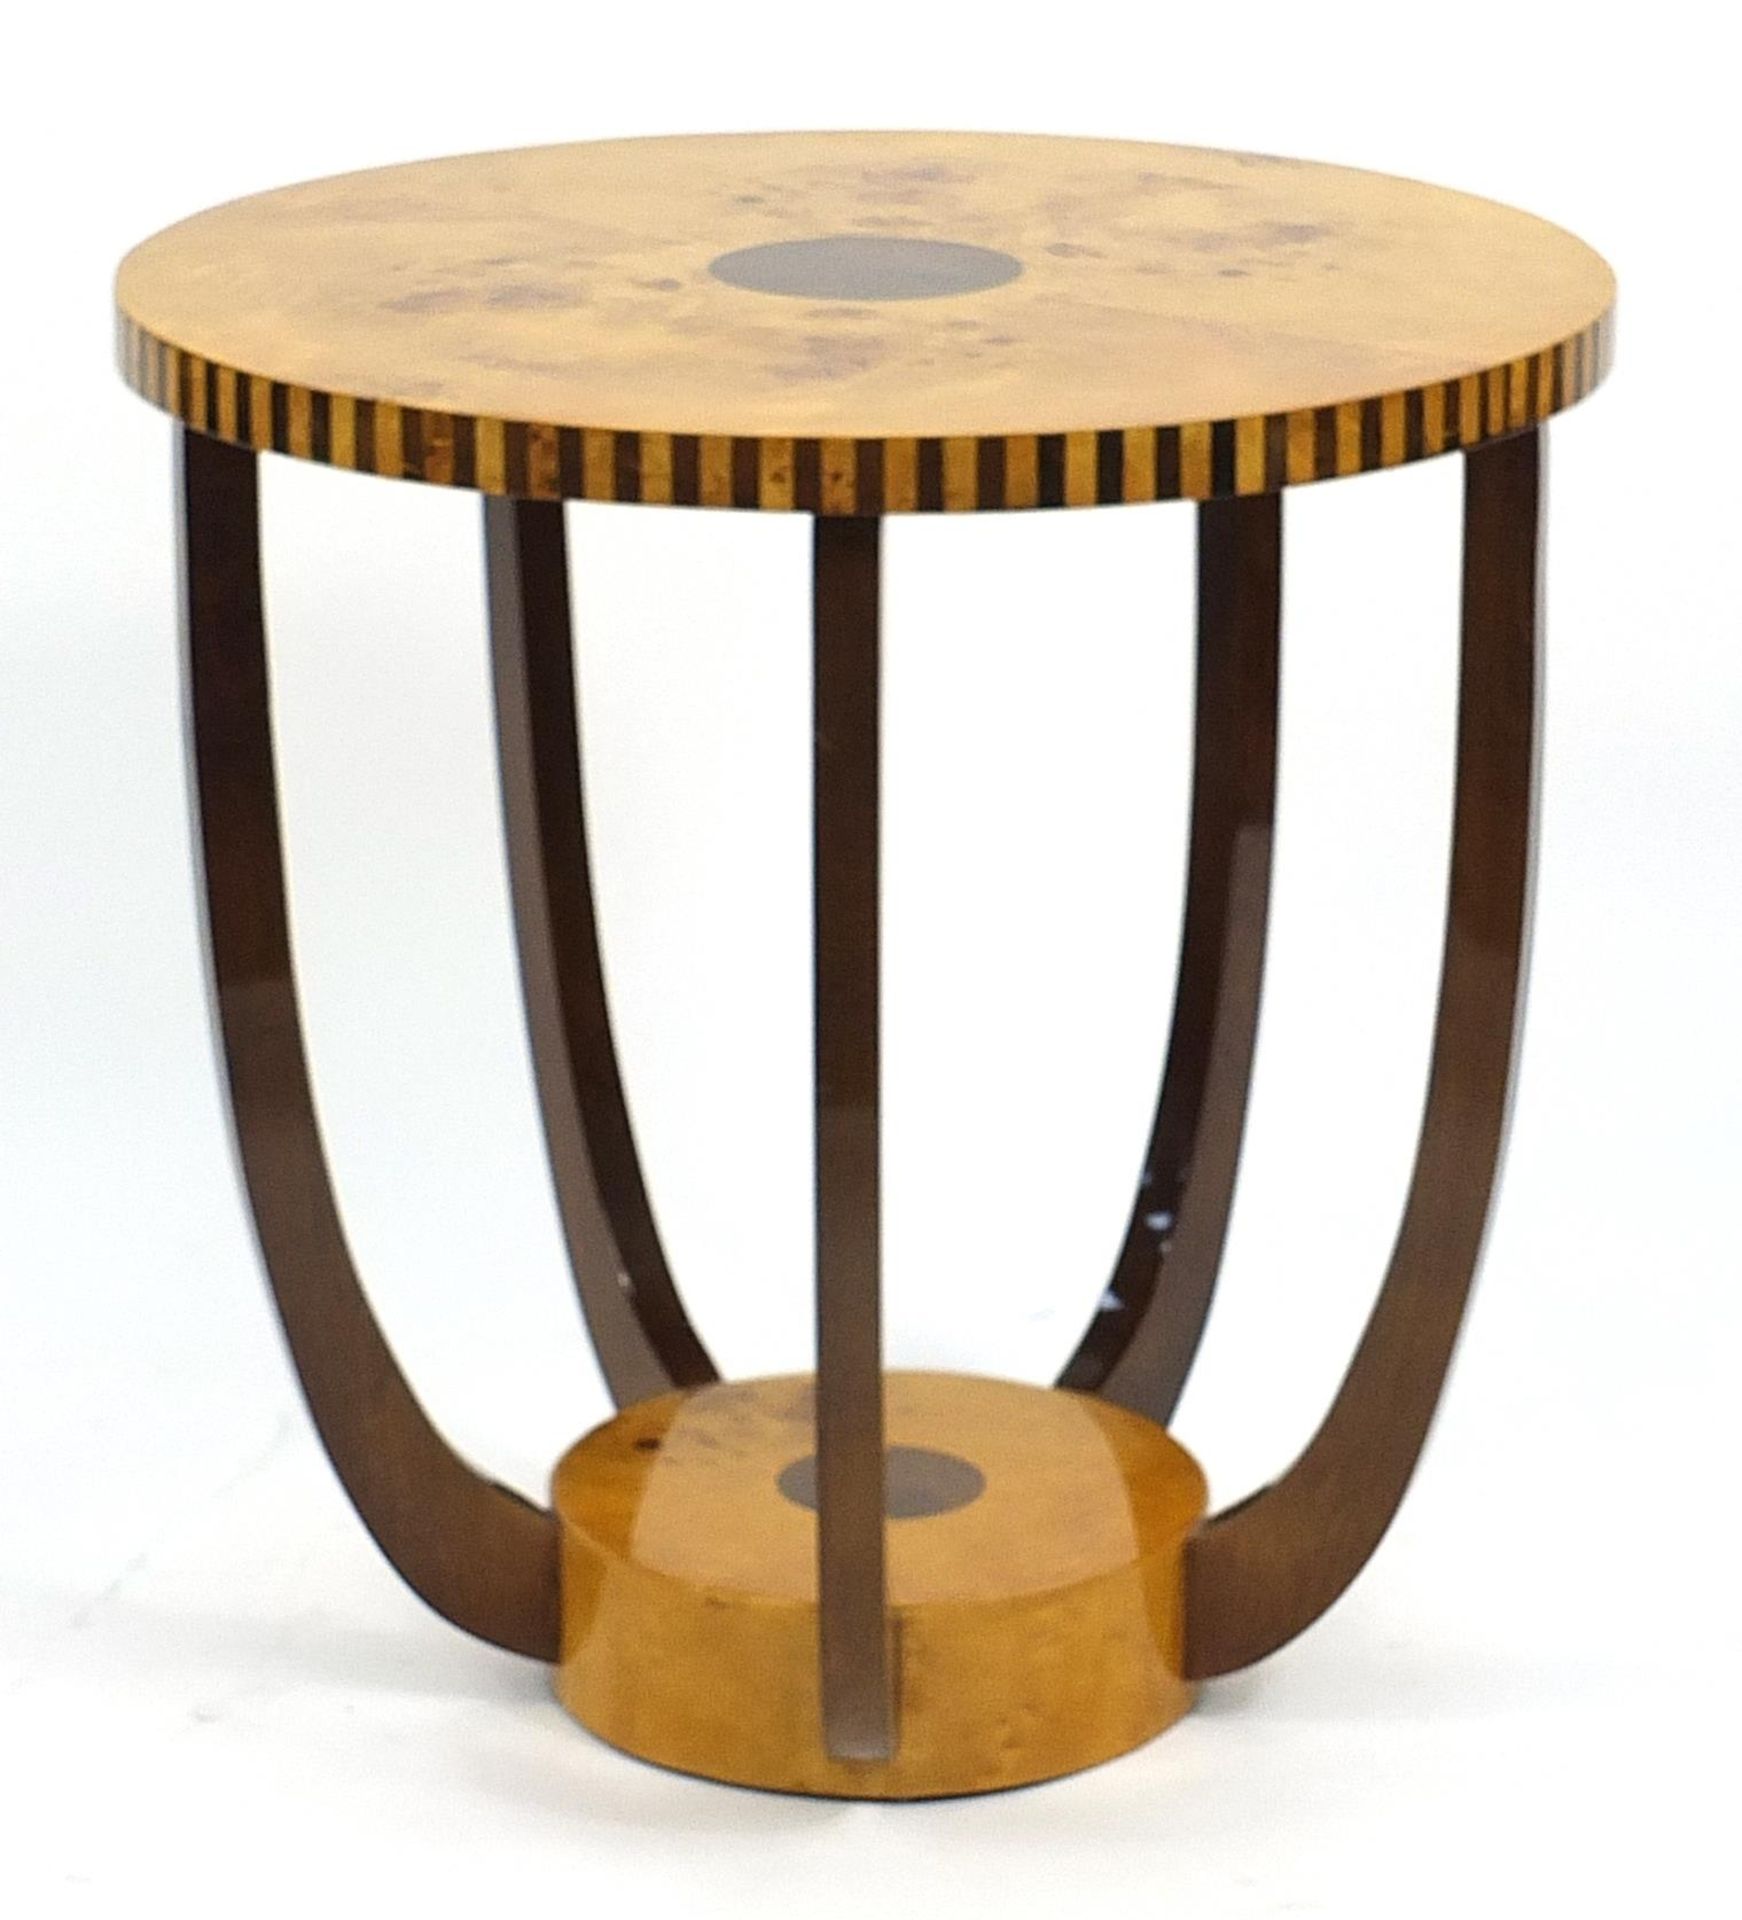 Art Deco style bird's eye maple and walnut effect occasional table with under tier, 60cm high x 59.